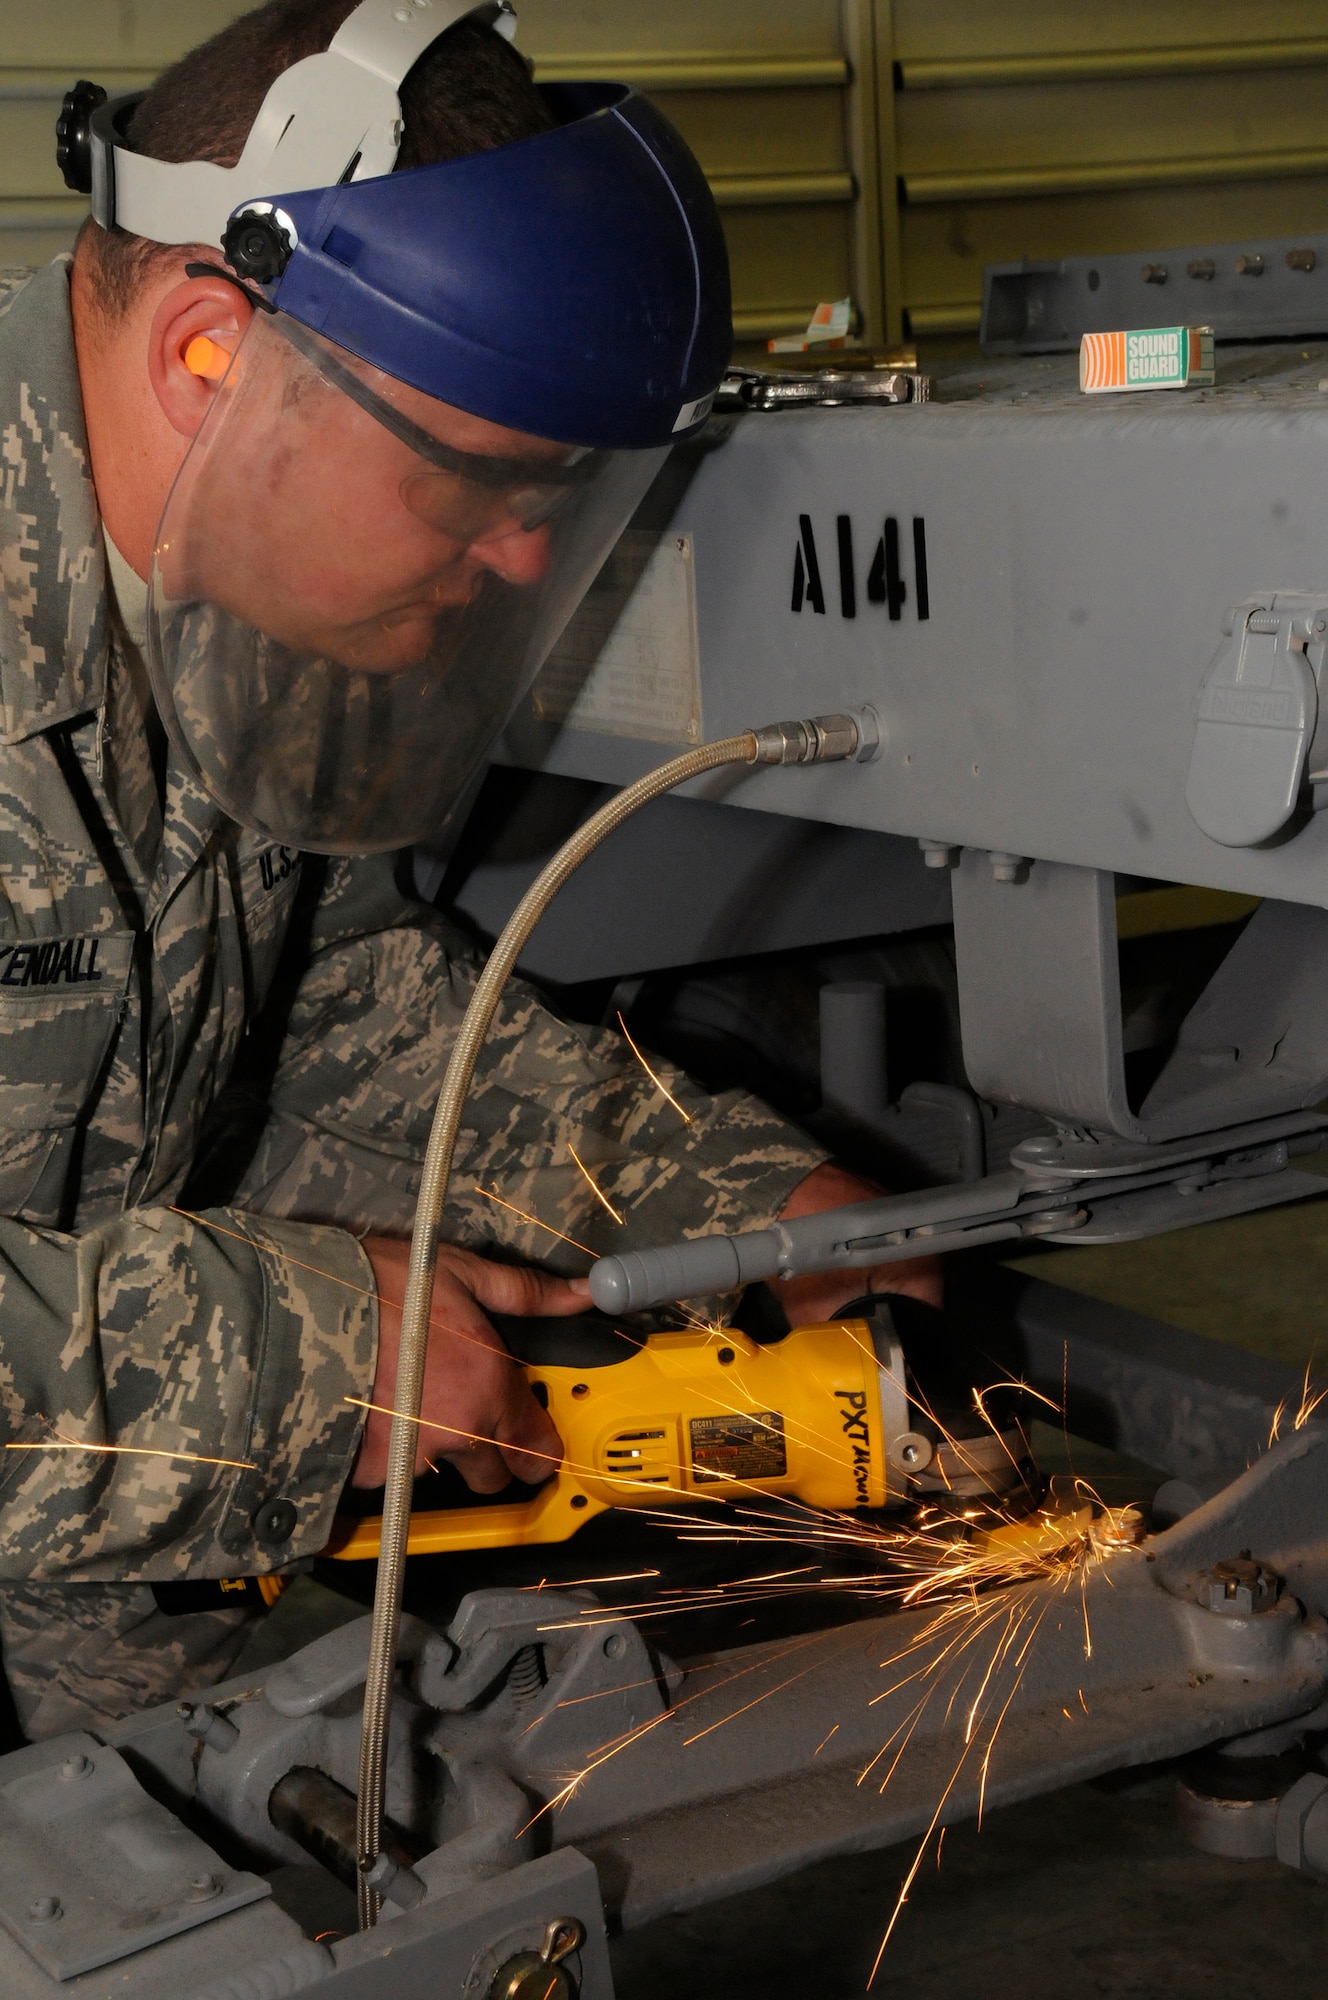 Staff Sgt. Brian Kuykendall, munitions systems journeyman assigned to the 379th Expeditionary Maintenance Squadron, uses a cut-off tool to remove a castle nut from the tie-rod of a munitions trailer Nov. 14, at an undisclosed air base in Southwest Asia. The 379th EMXS munitions section delivers weapons to the flight line to be used in the Global War on Terrorism.  Sergeant Kuykendall, a native of Reedley, Calif., is deployed from Ellsworth Air Force Base, S.D., in support of Operations Iraqi and Enduring Freedom and Joint Task Force-Horn of Africa. (U.S. Air Force photo by Staff Sgt. Darnell T. Cannady/Released)